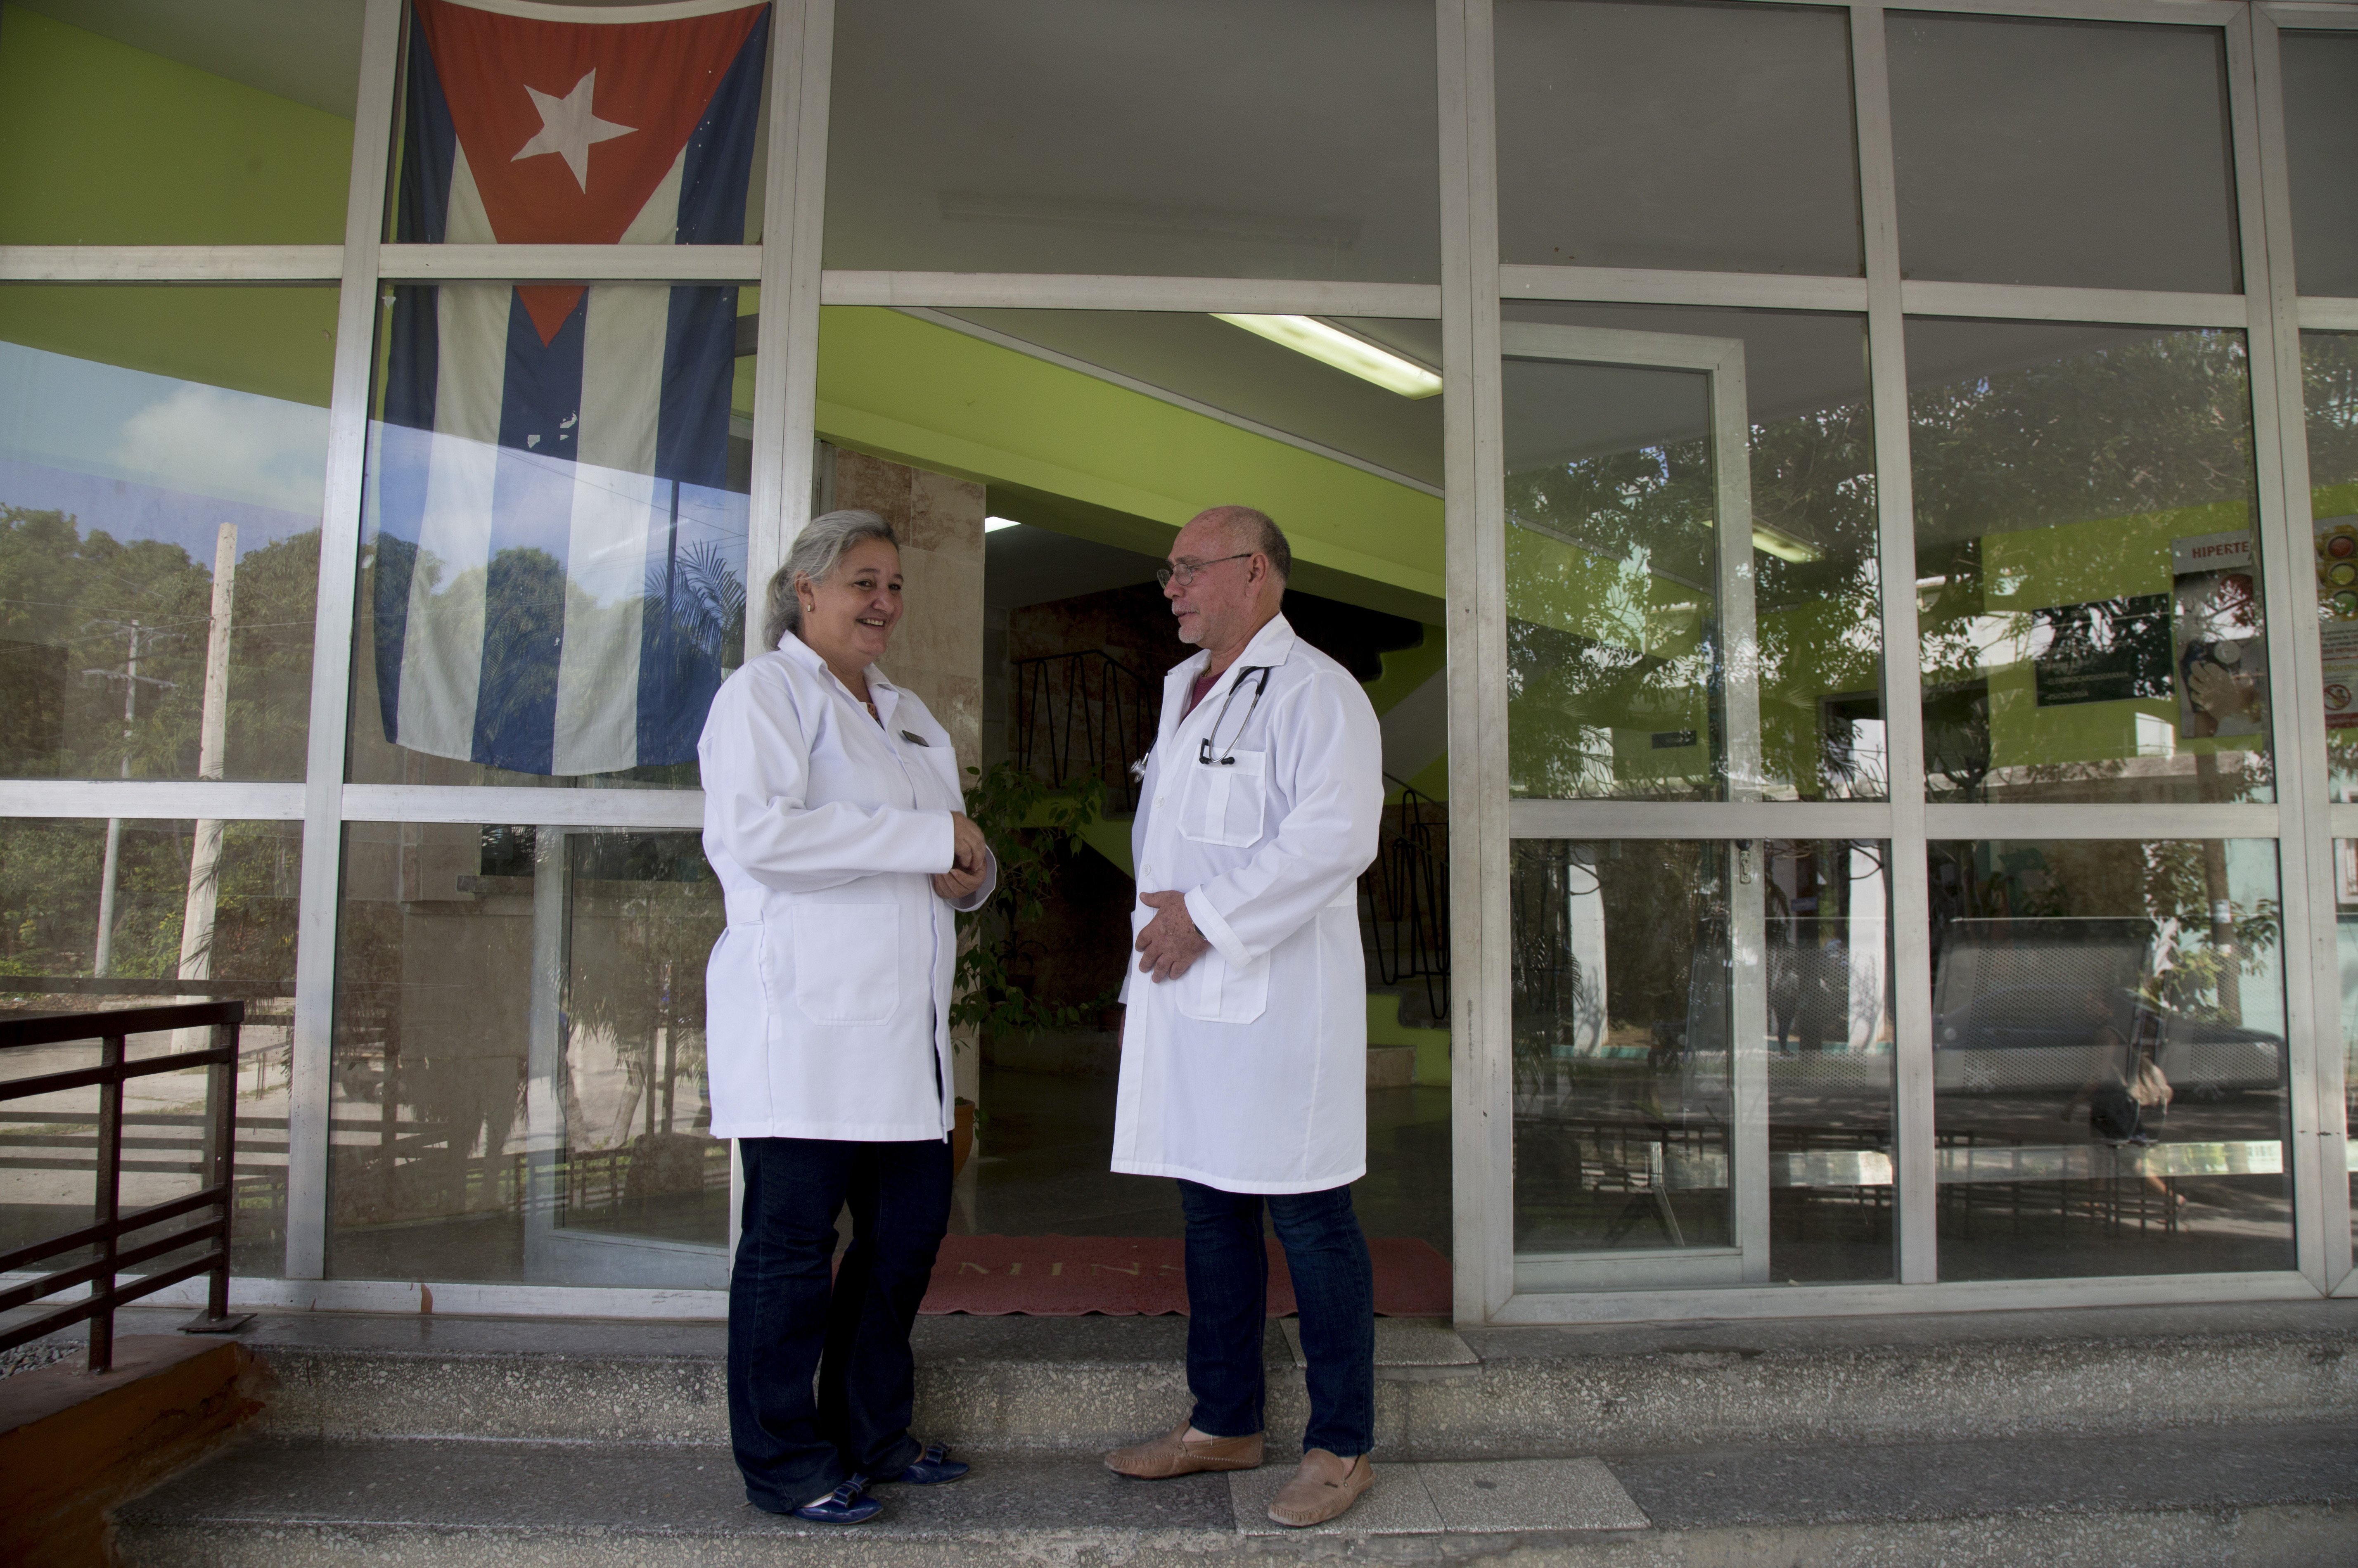 Dr. Zuzel del Valle and Dr. Jorge Cardenas, stand at the entrance of a polyclinic in Havana, Cuba, Wednesday, Feb. 12, 2020.  Hundreds of neighborhood clinics are the front-line defense against contagious diseases in Cuba, providing care to patients seeking relief from colds, aches and minor injuries. (AP Photo/Ismael Francisco)